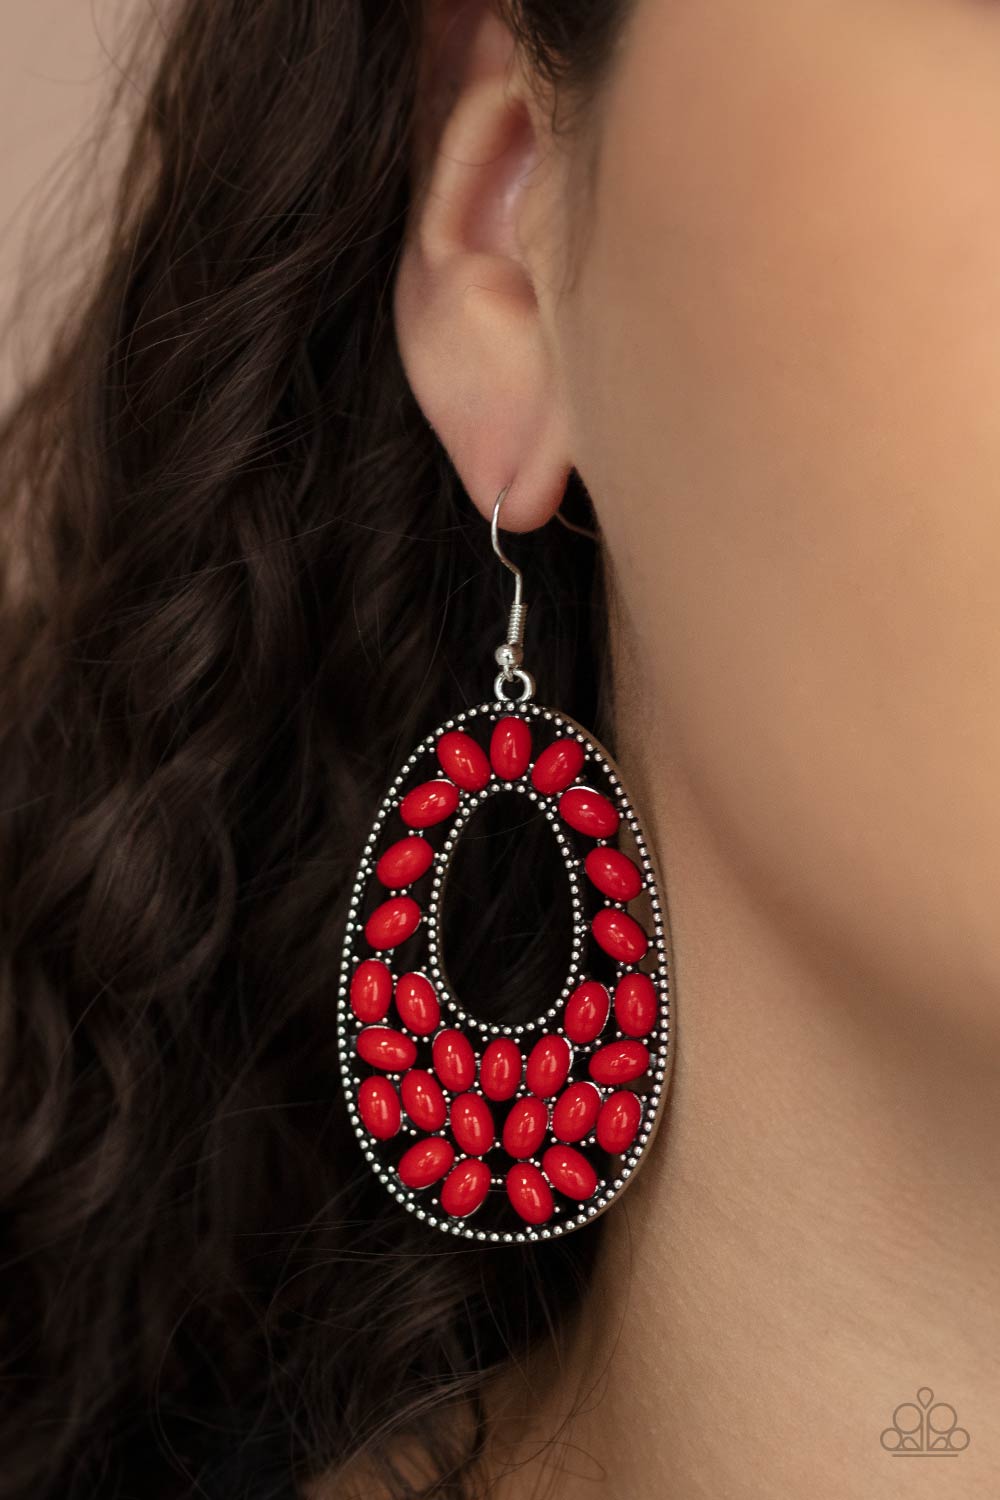 Beaded Shores - Red earrings Paparazzi